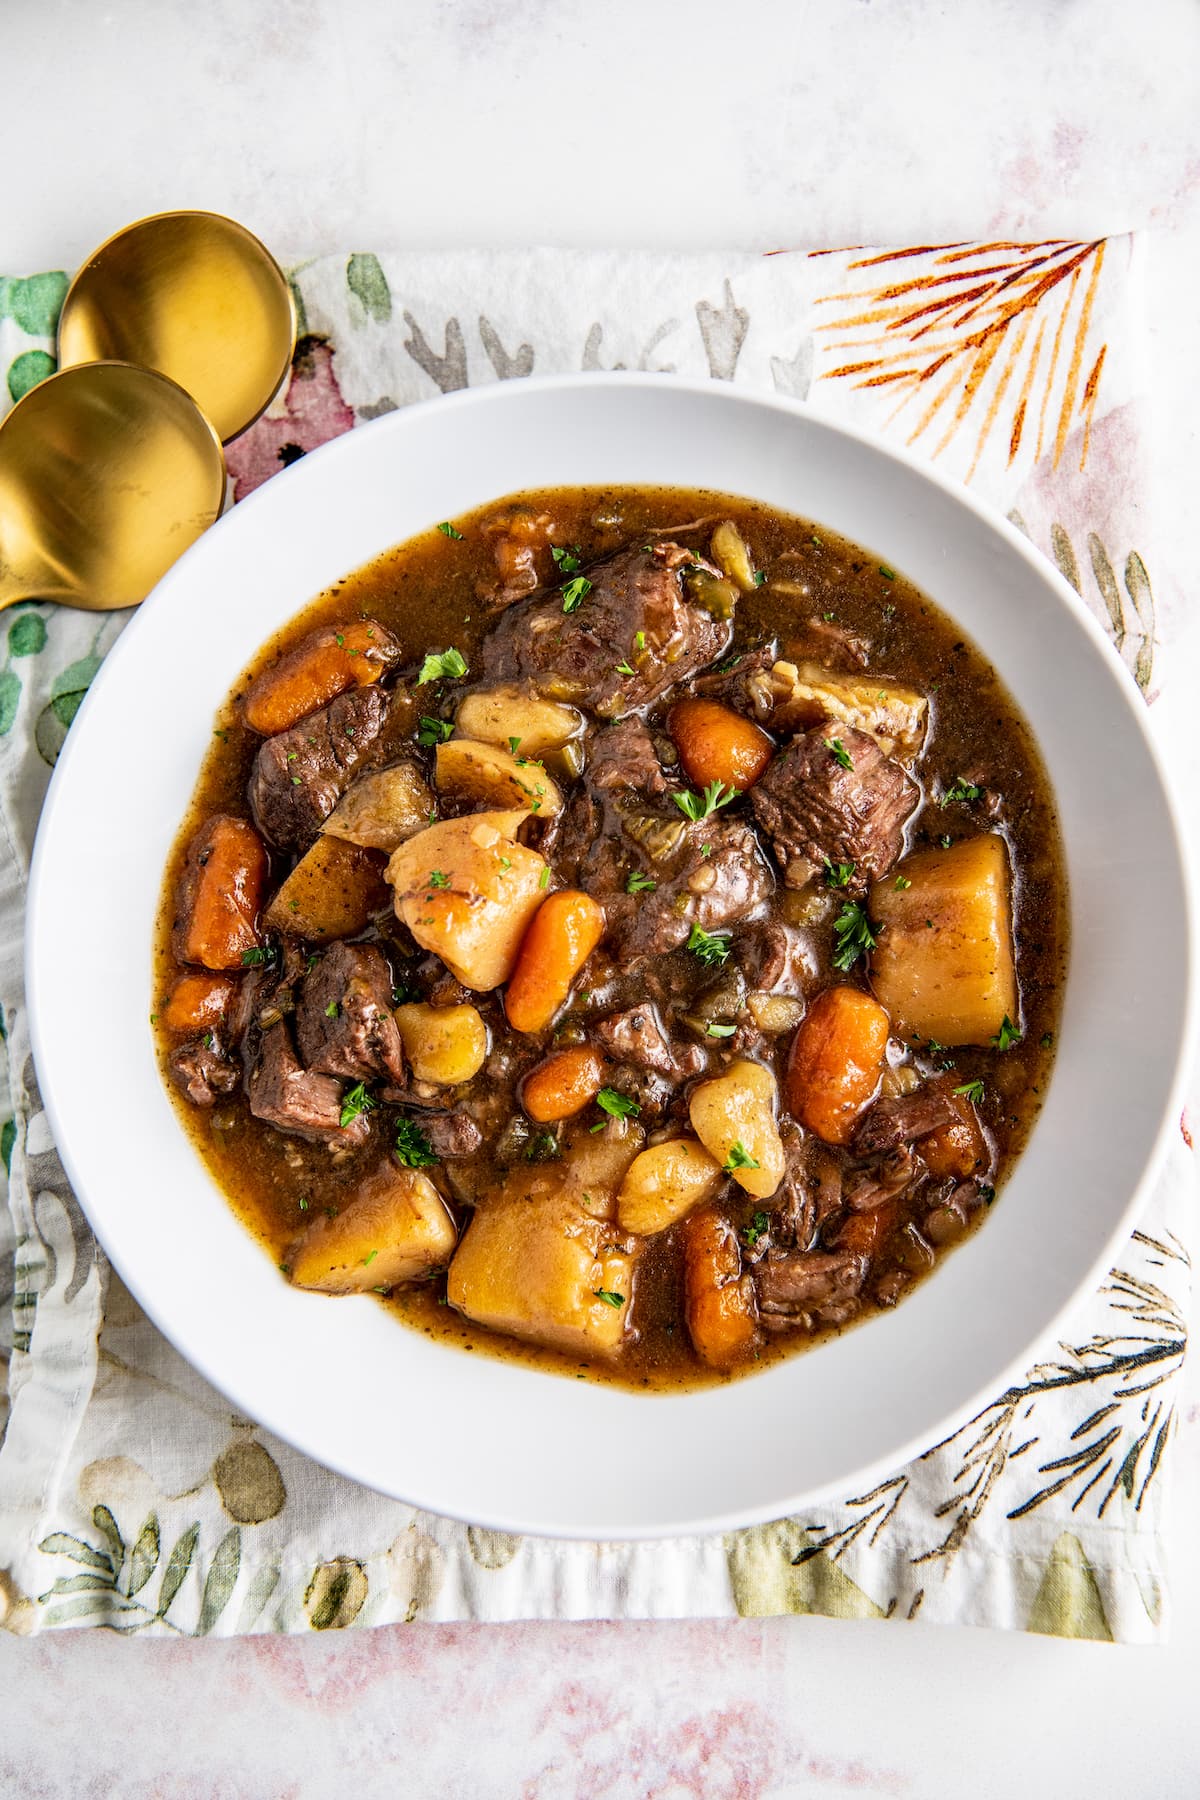 A bowl of beef stew that's loaded with carrots, potatoes, and stew meat.